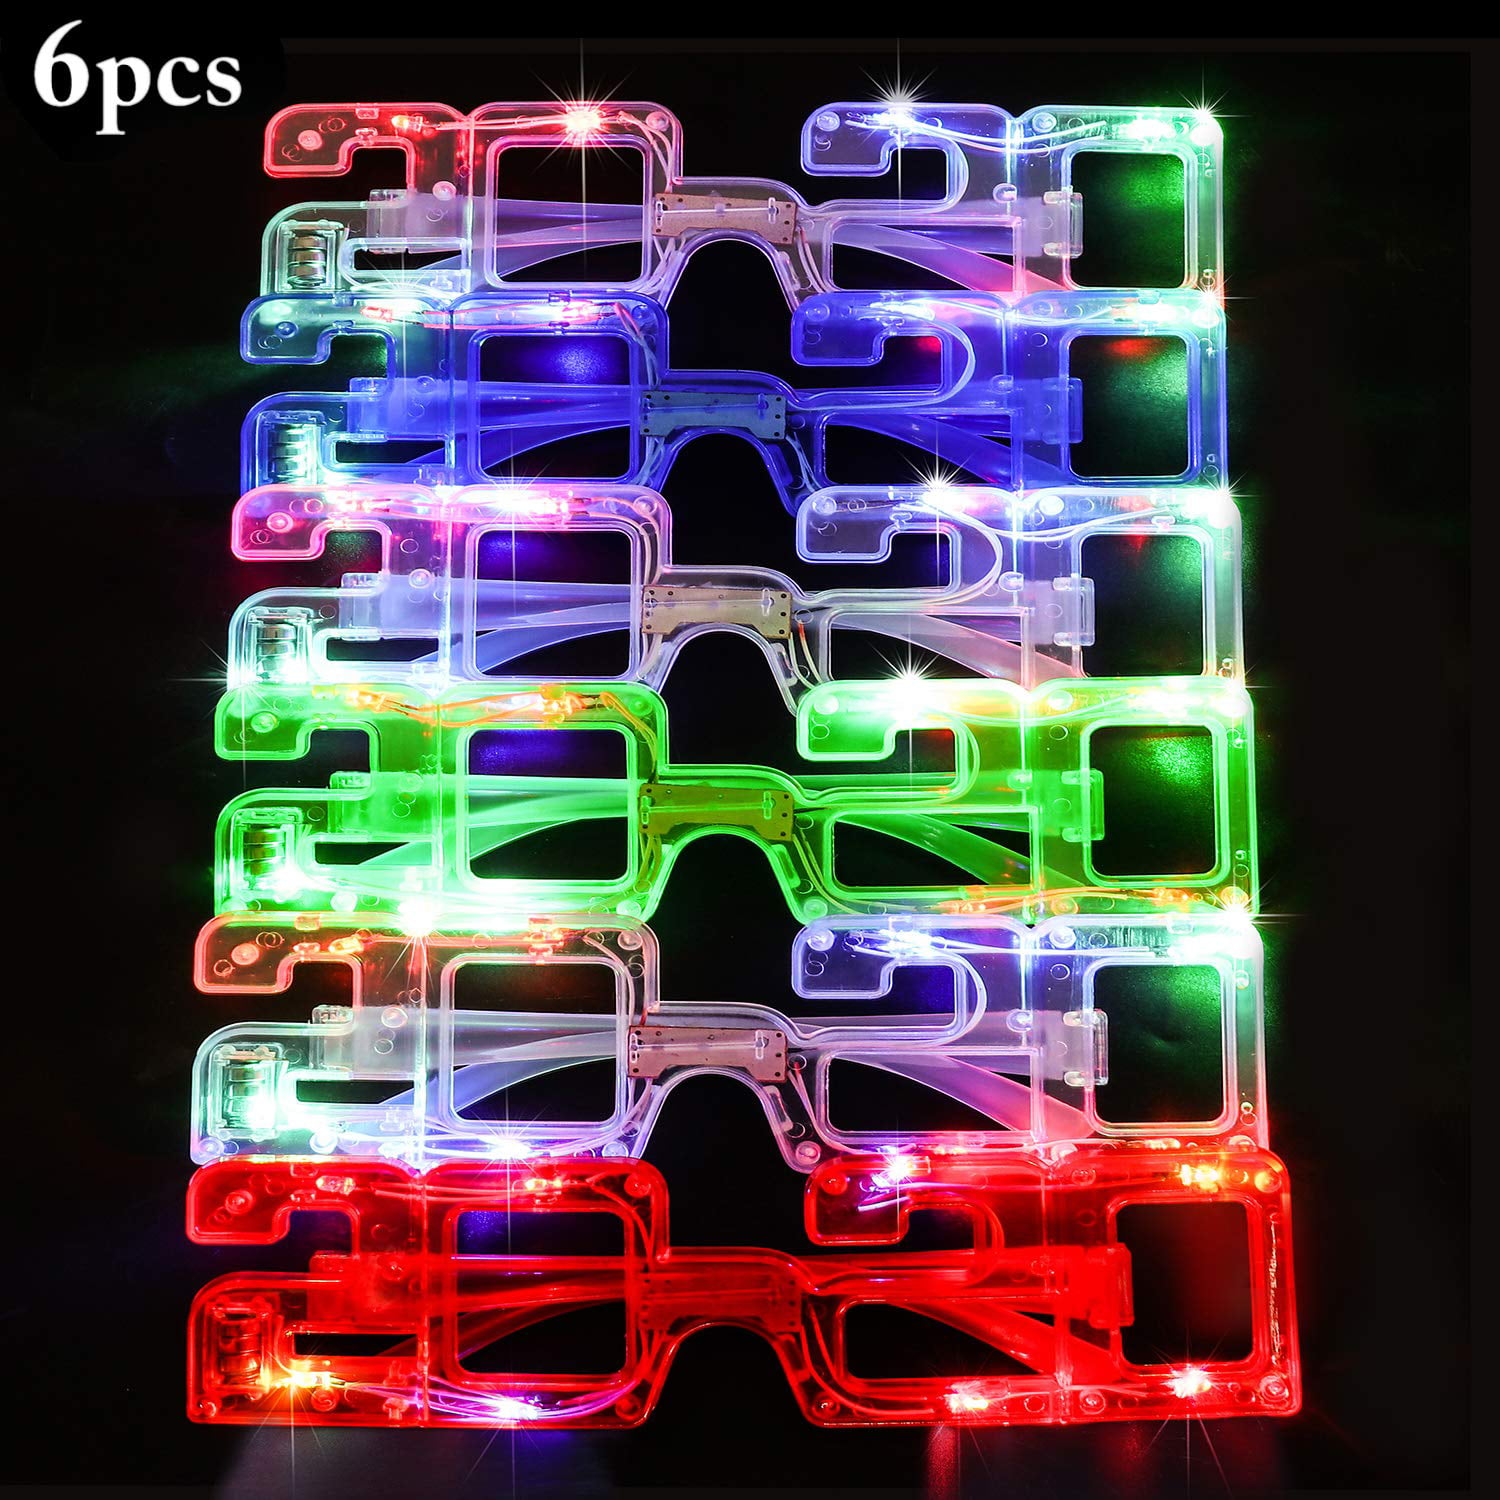 592C Light Up New Years Eve Party Butterfly Glasses Eye Glasses Best Price 1 pcs 